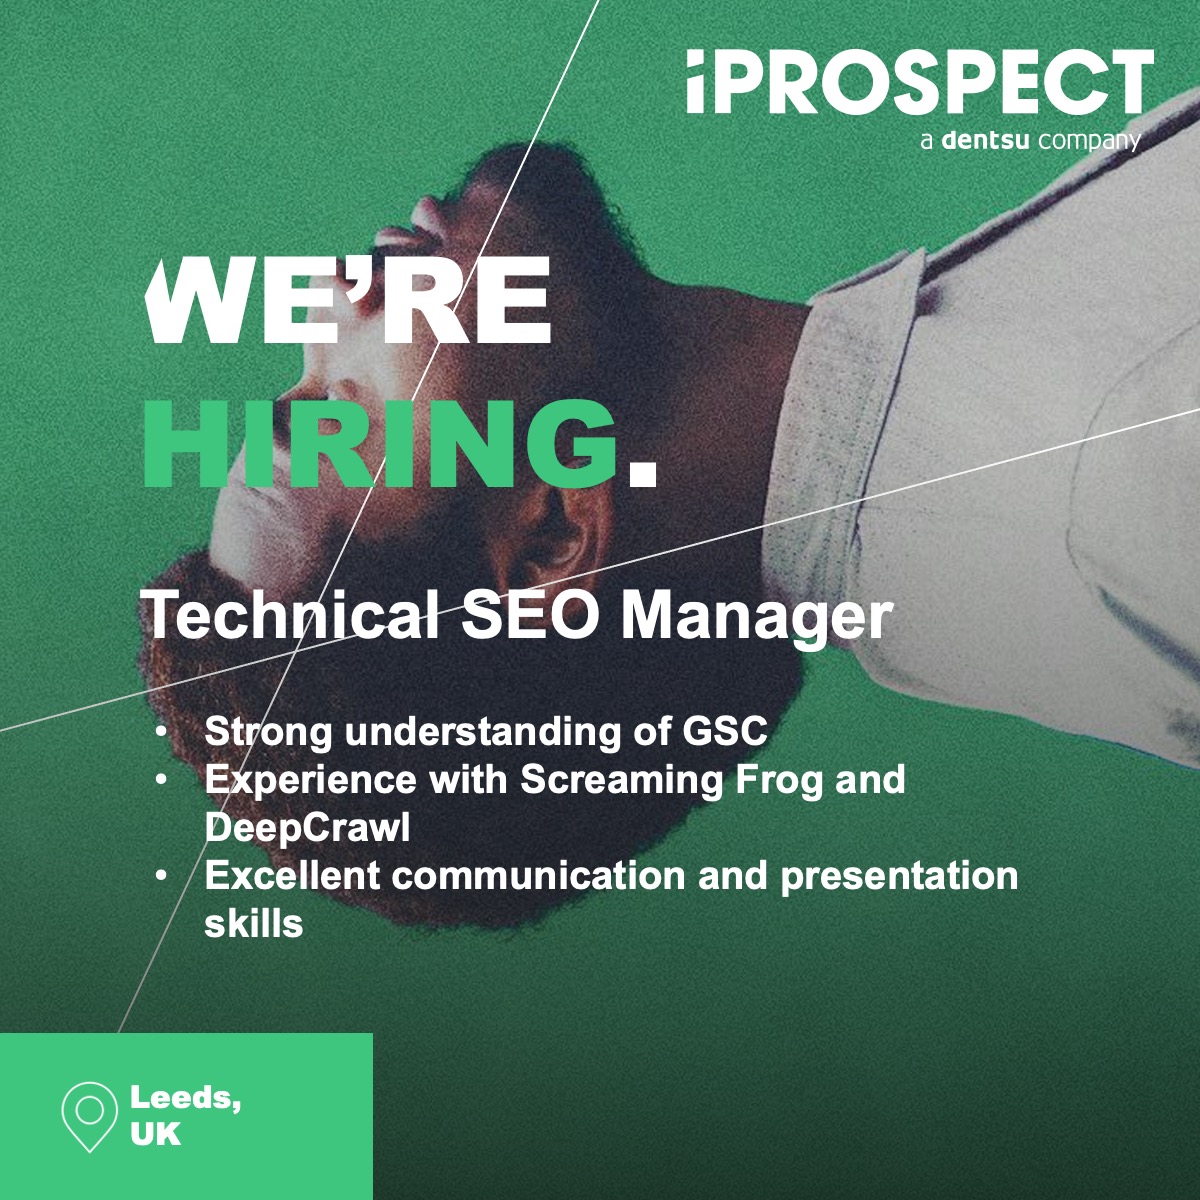 Work with us! Join our team in Leeds, UK as Technical SEO Manager. Apply here: linkedin.com/jobs/view/3620… #werehiring #opentowork